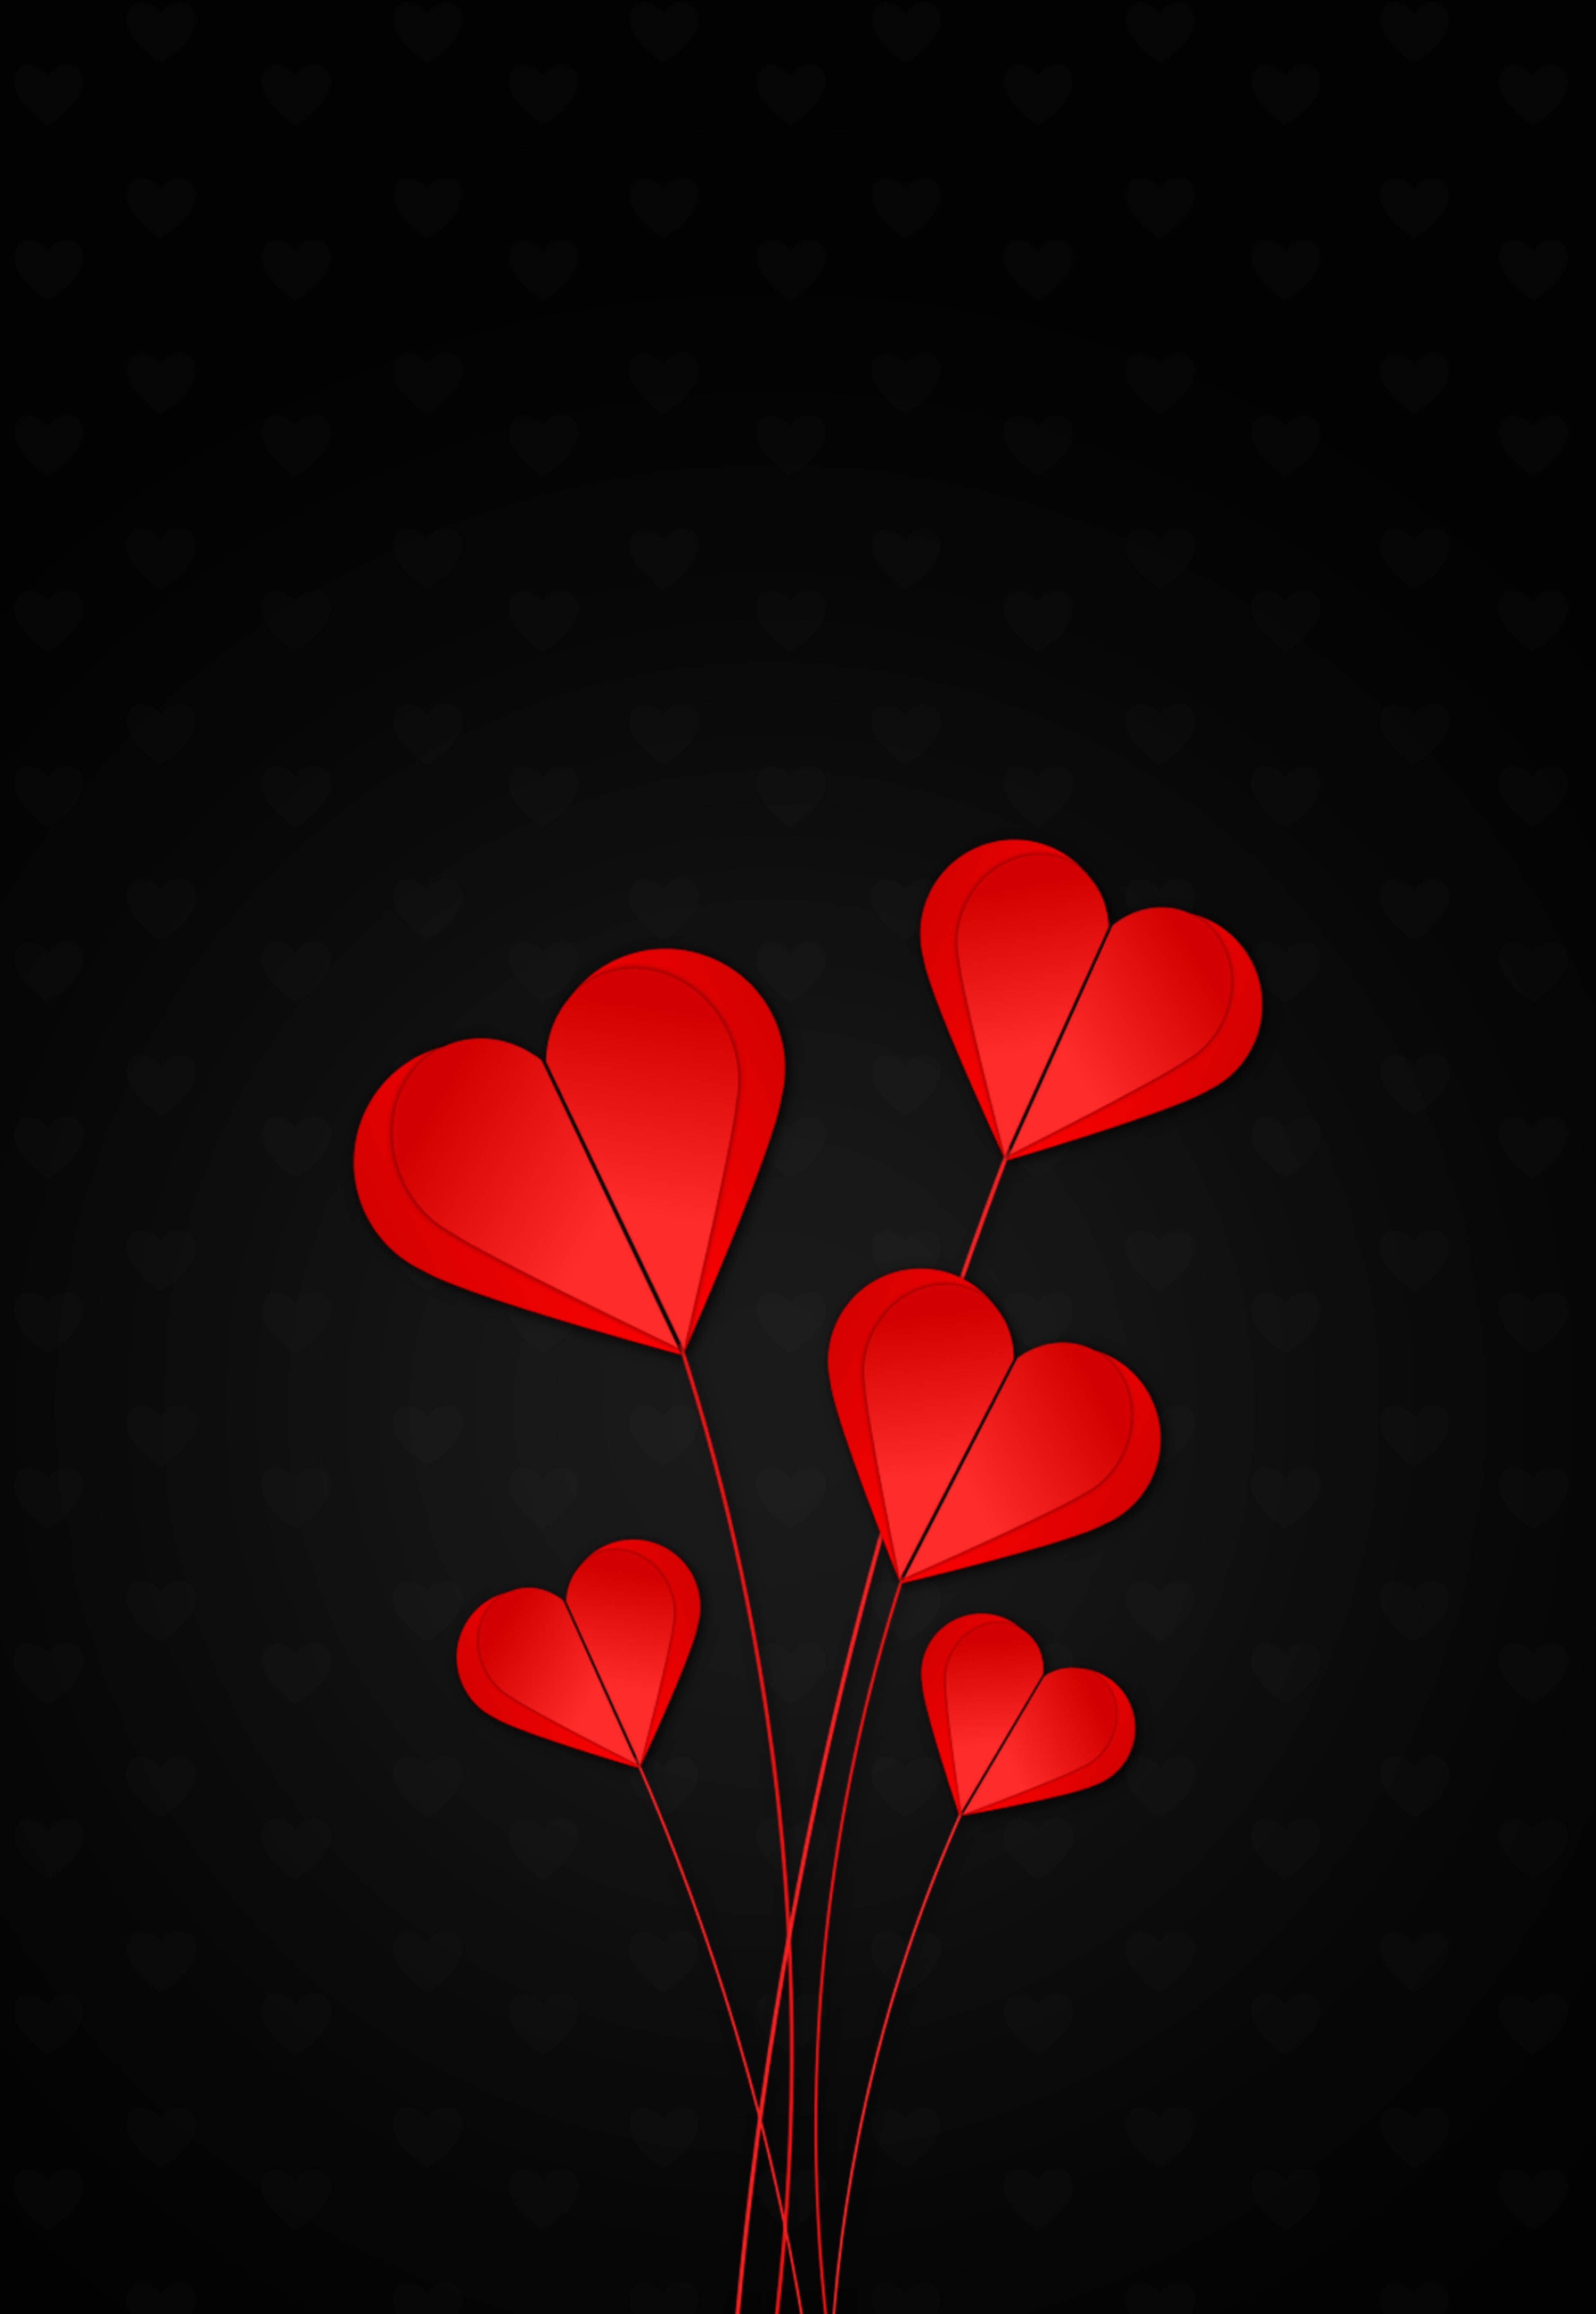 hearts, love, black background, red 2160p